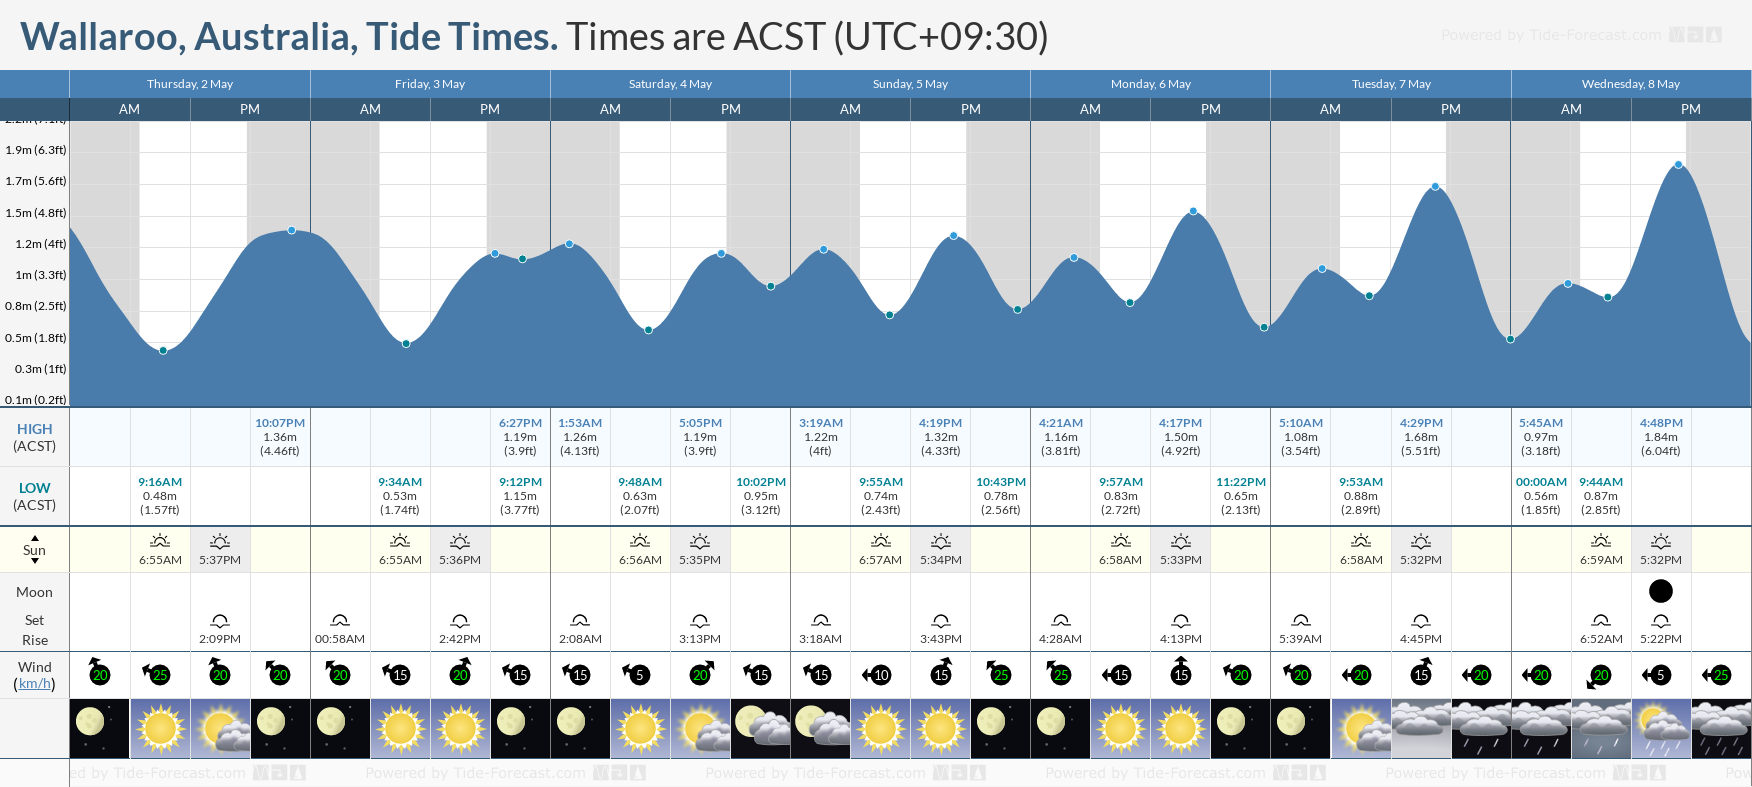 Wallaroo, Australia Tide Chart including high and low tide tide times for the next 7 days